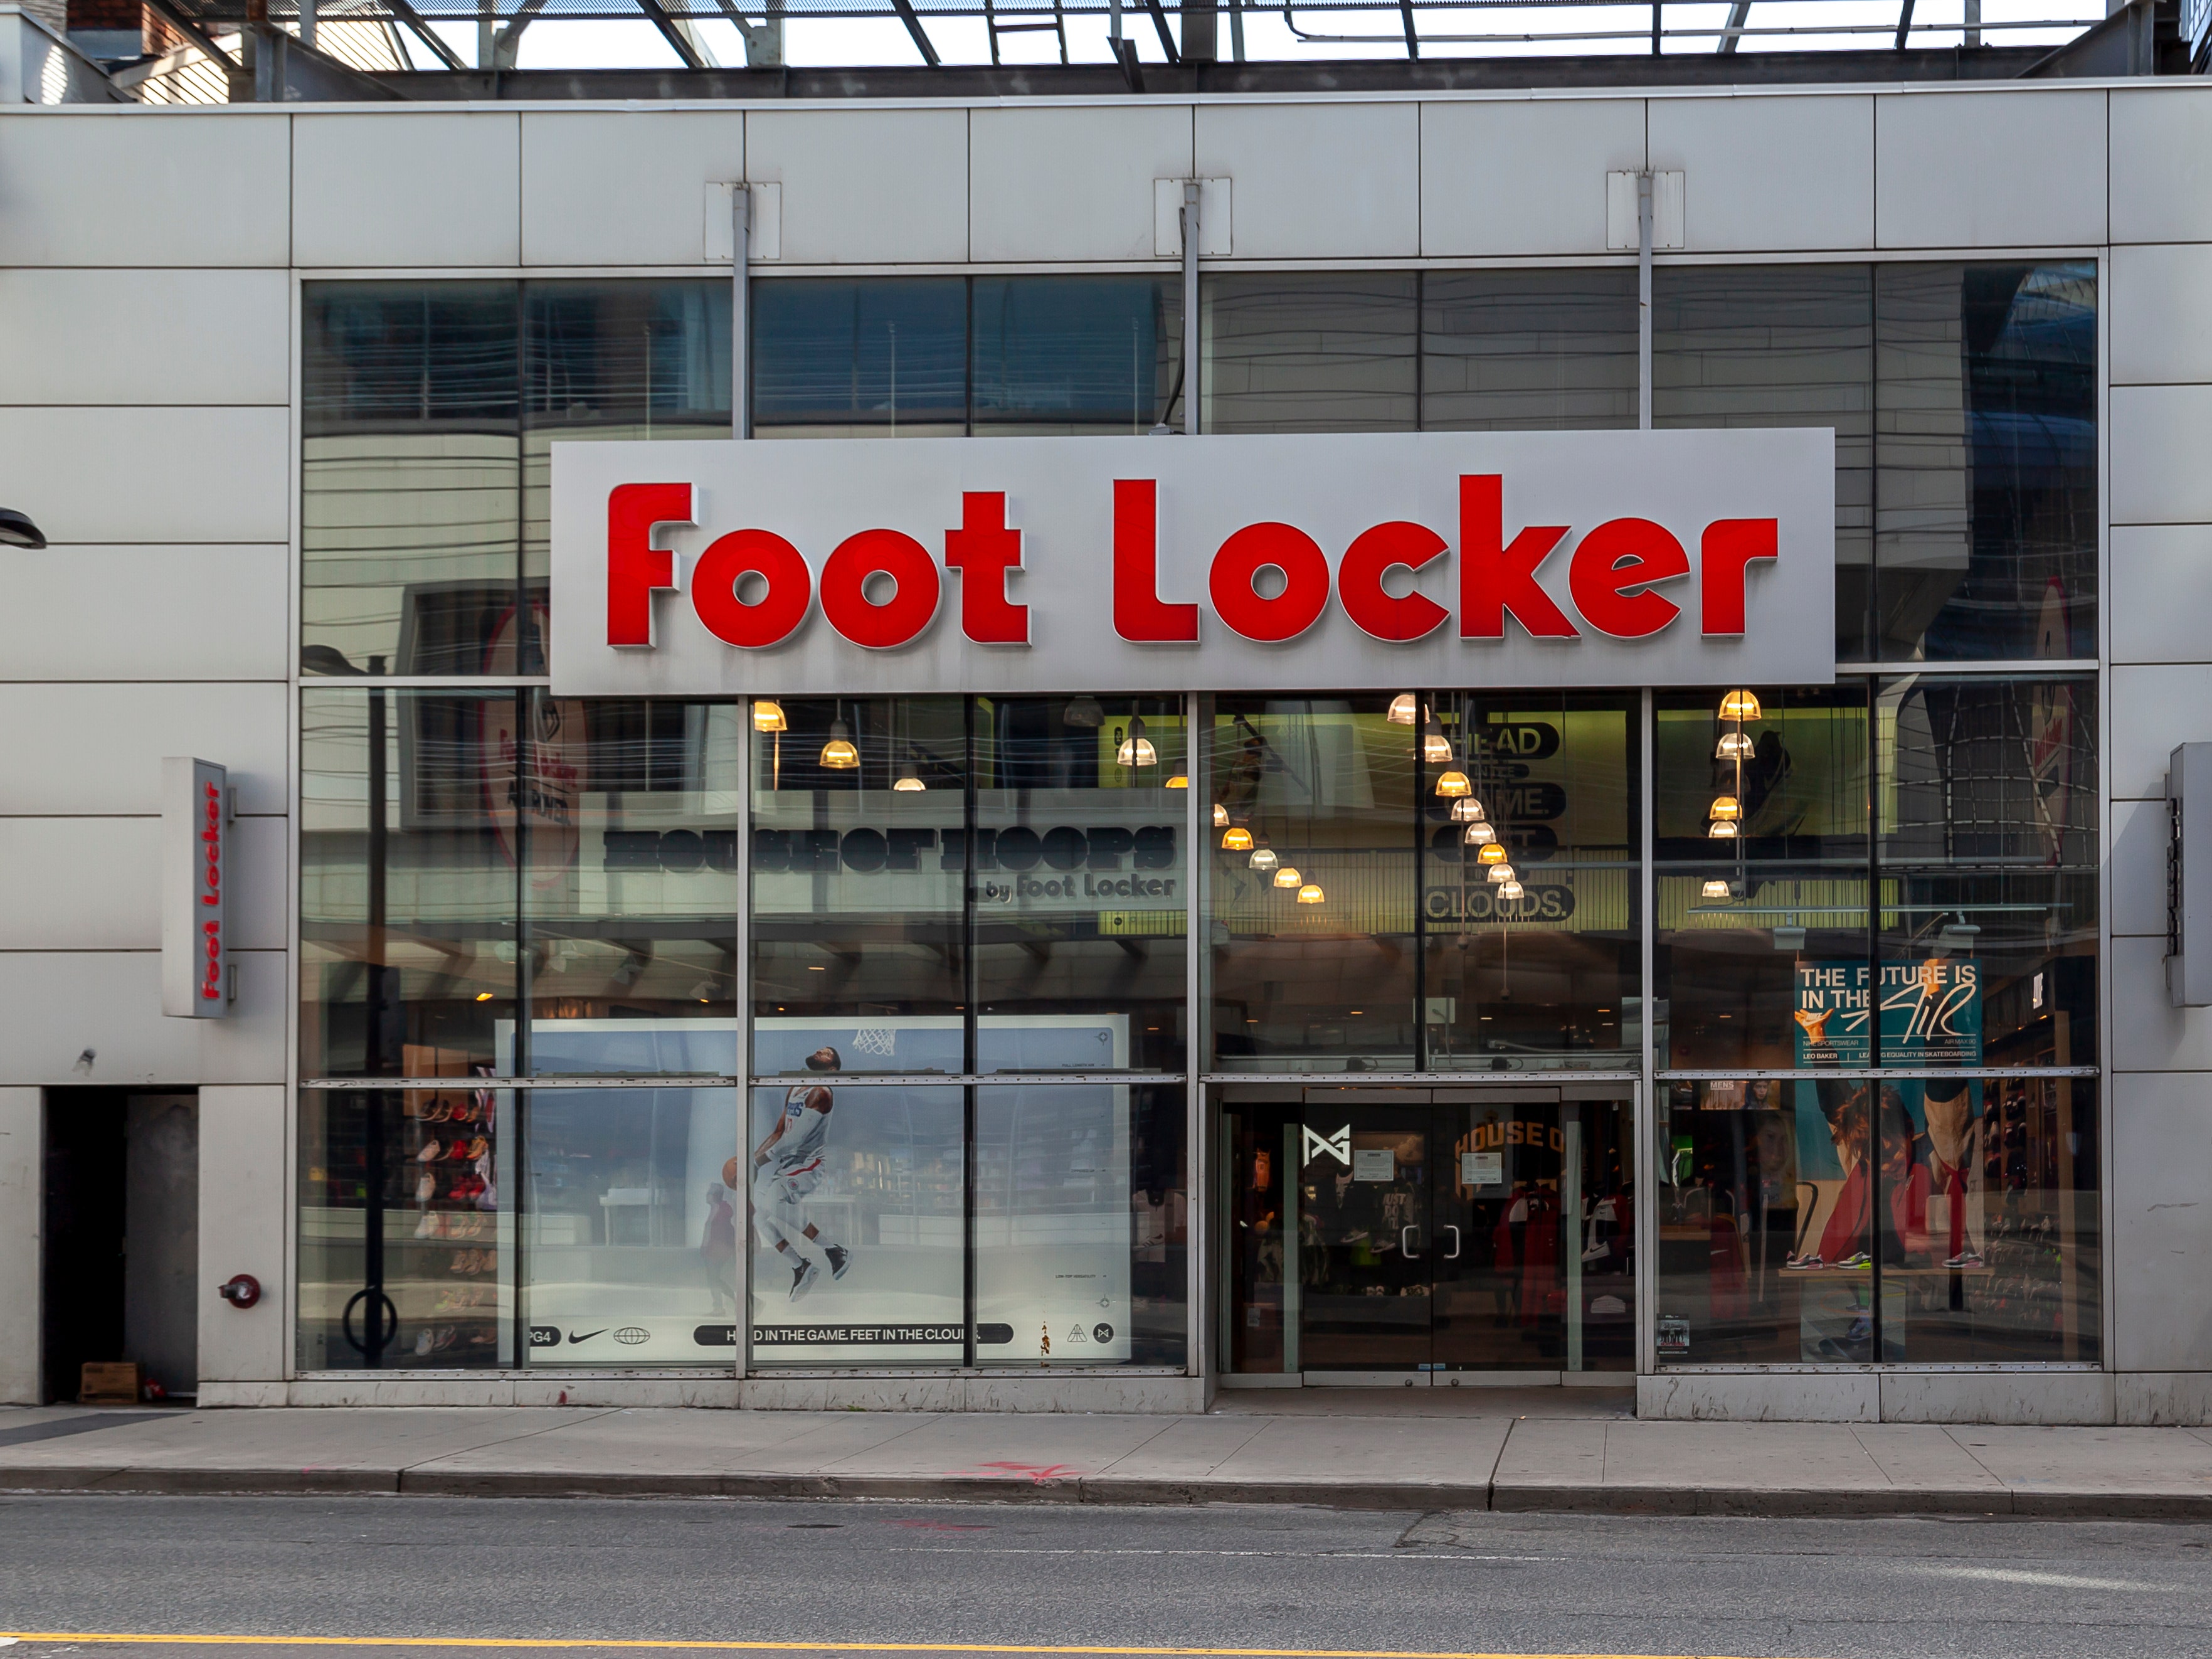 Foot Locker: 10% Discount on Shoes and Apparel